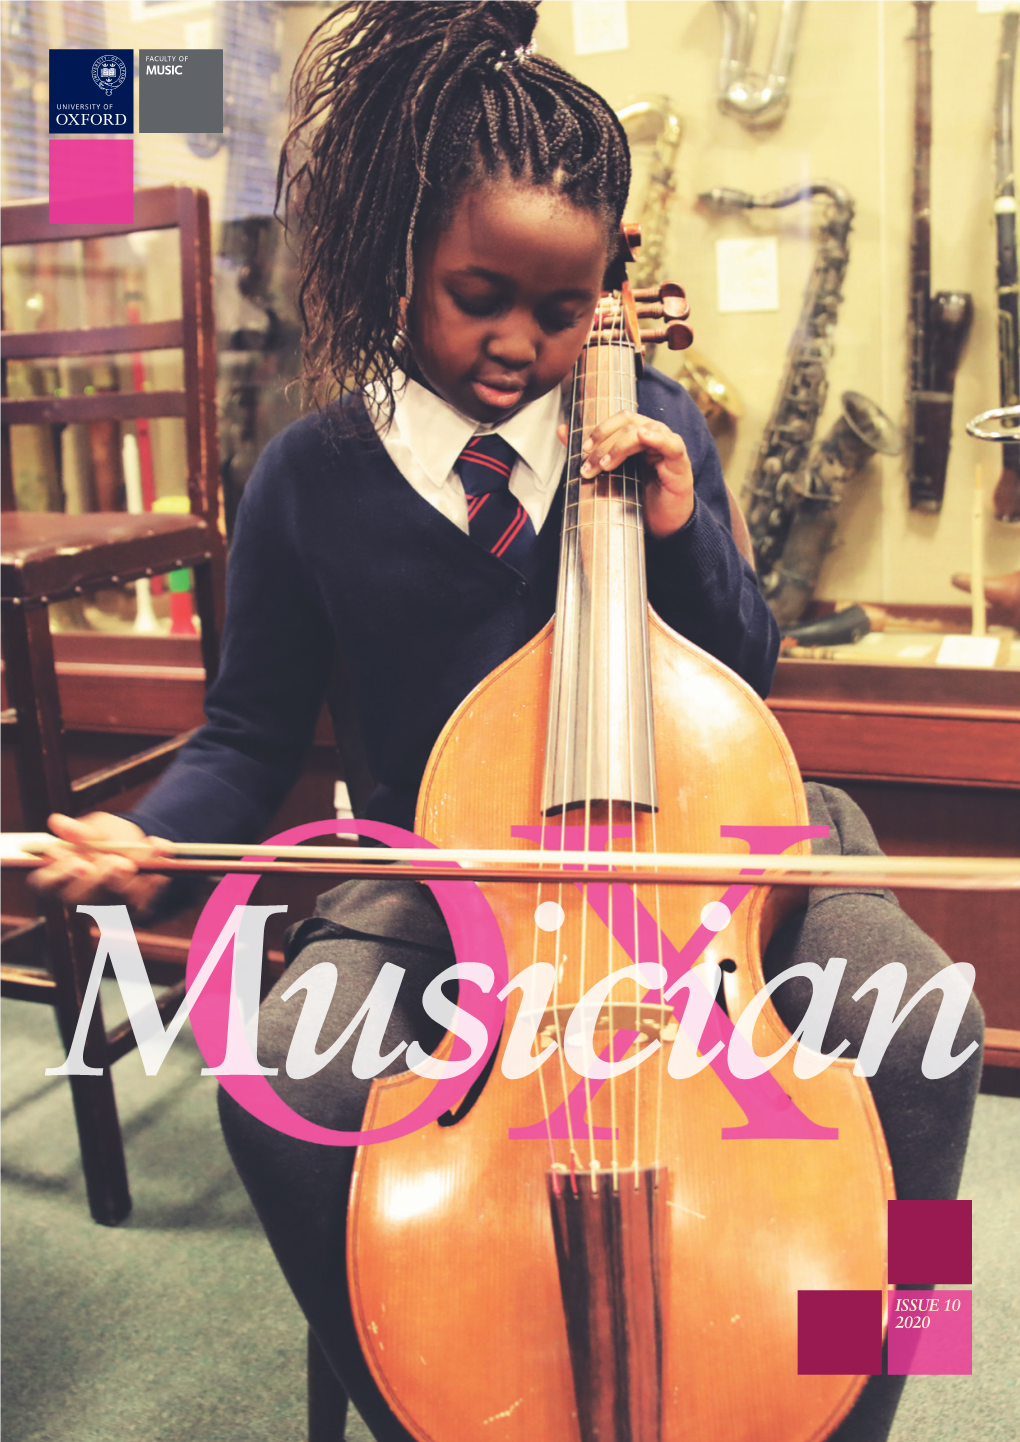 Oxford Musician Issue 10 2020 Faculty News